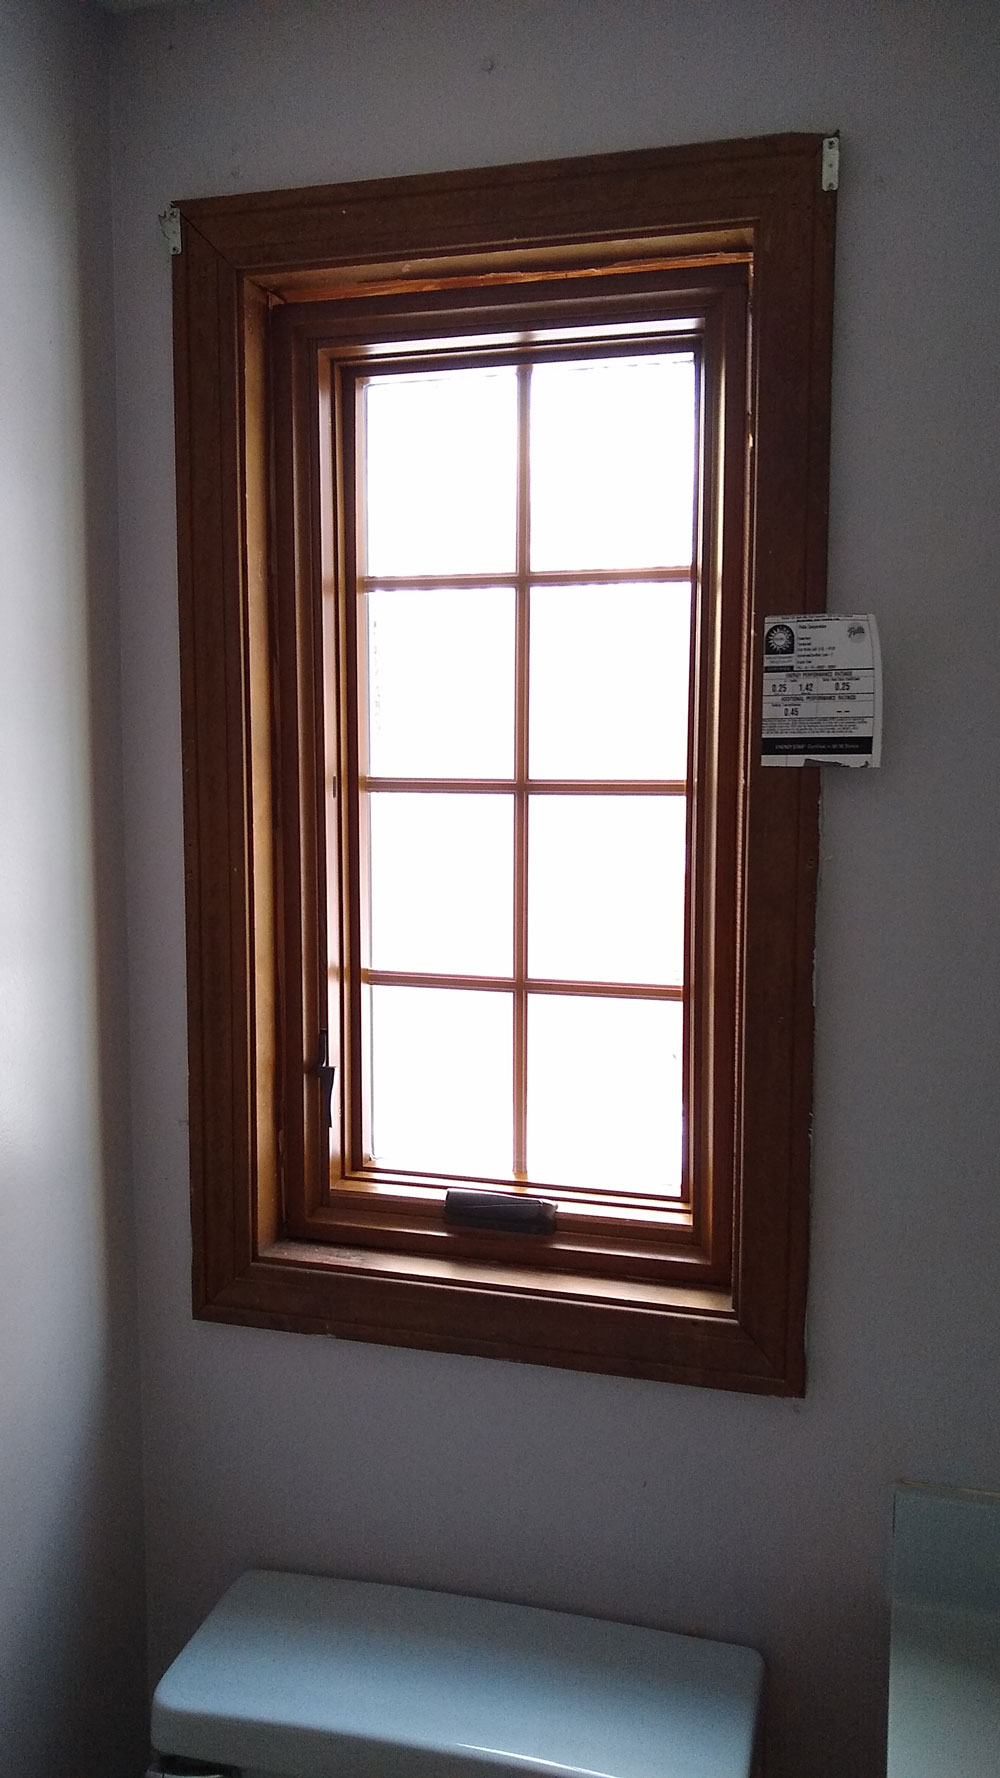 New double-hung window with grilles in bathroom of Northfield, MA, home